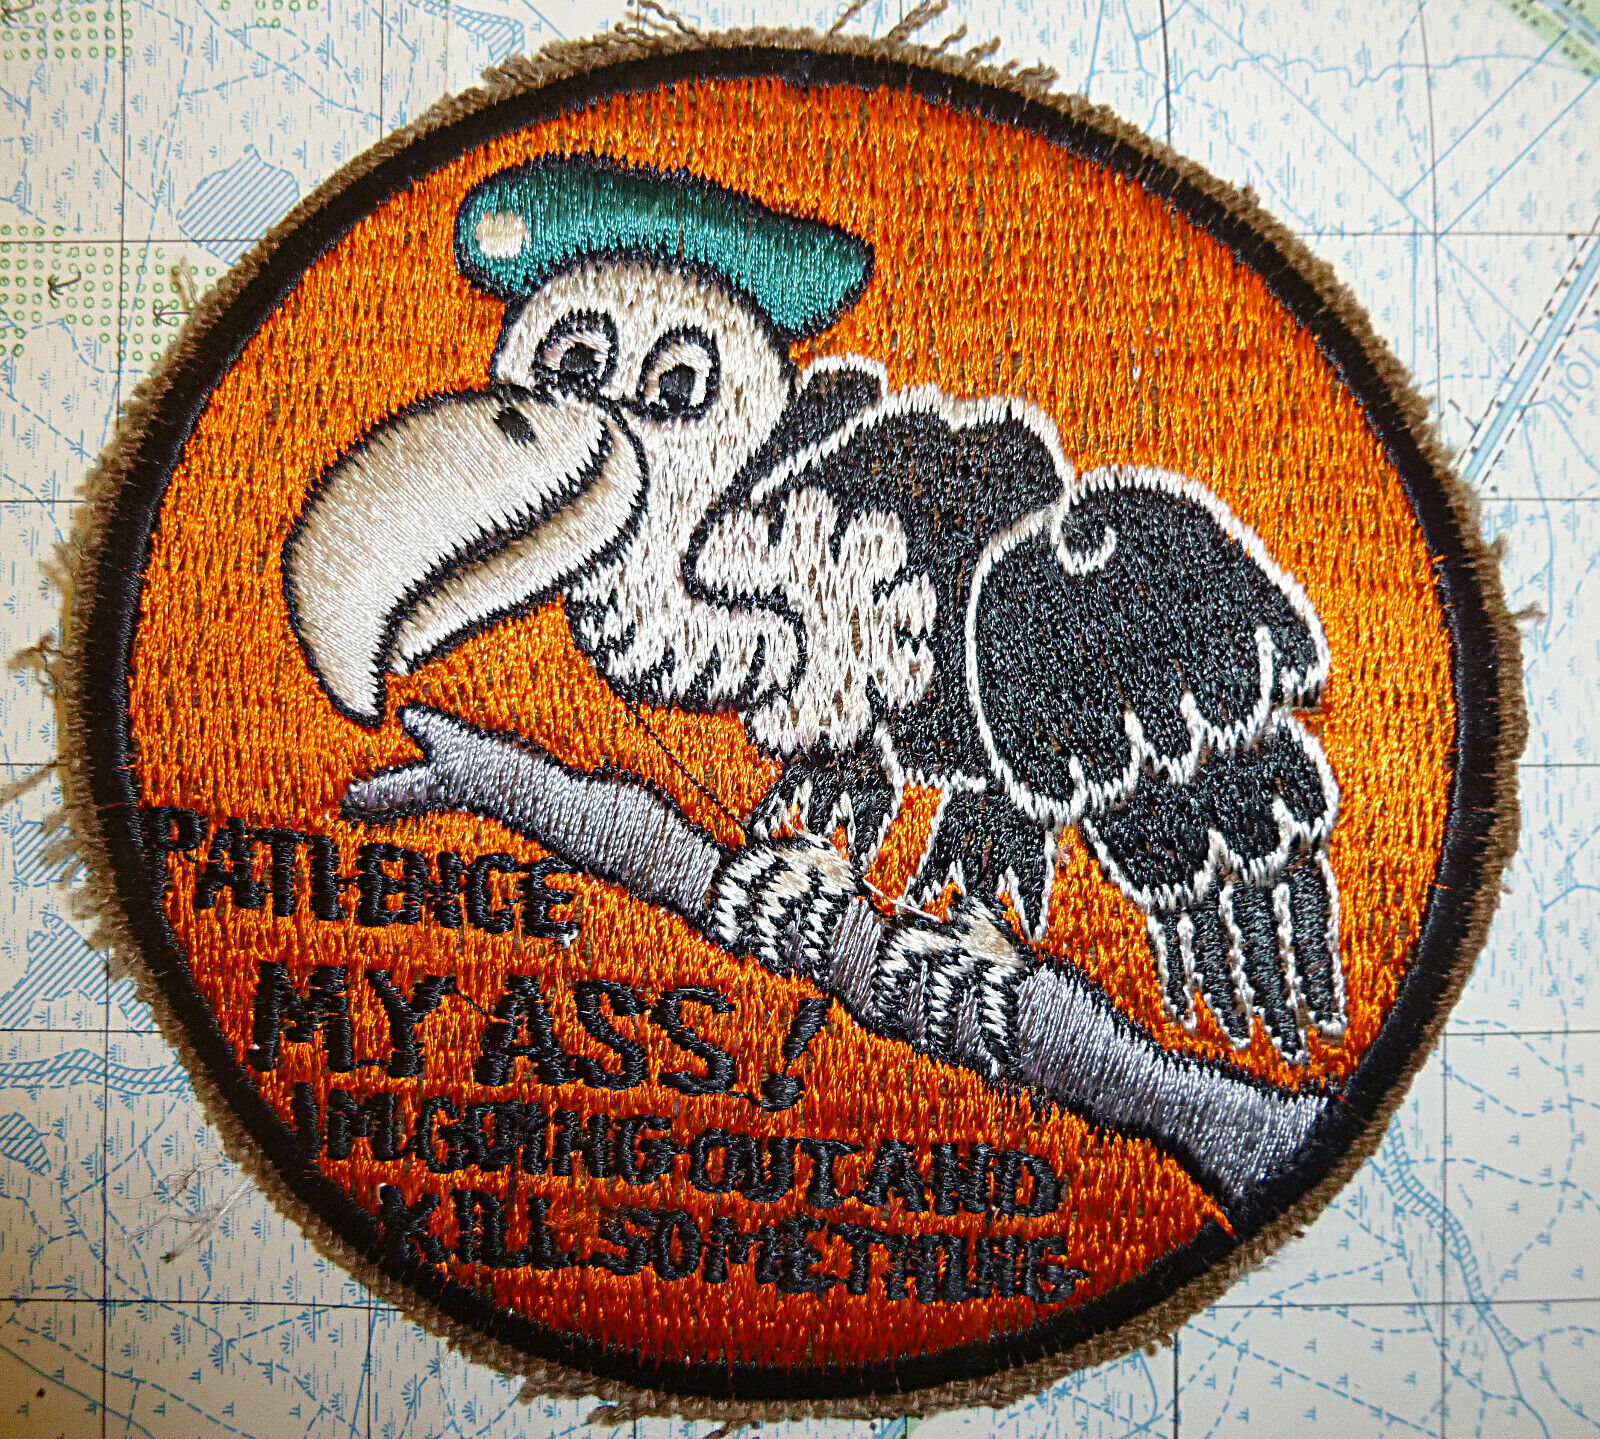 I'm Going Out to Kill Somone - Patch - US GREEN BERETS SOG - Vietnam War - B.105